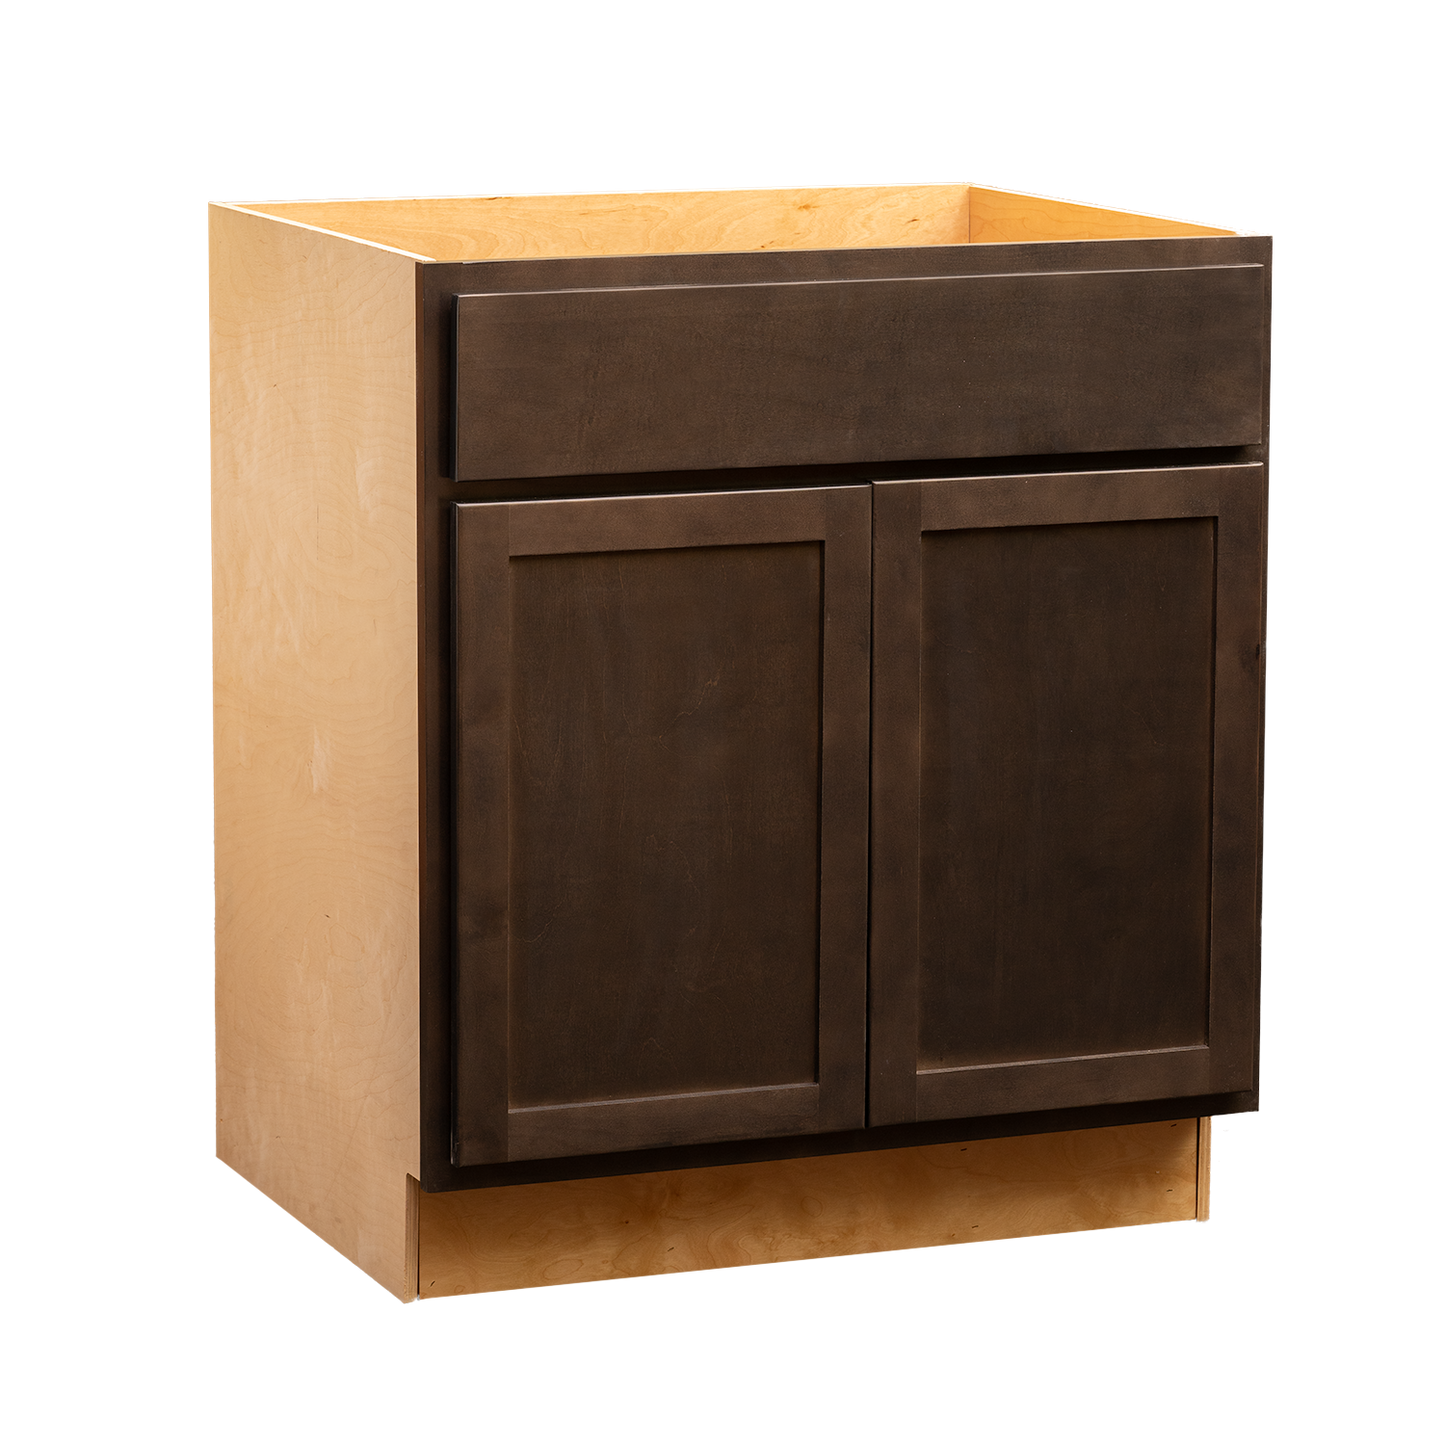 Quicklock RTA (Ready-to-Assemble) Espresso Stain Sink Base Cabinet- 36"W